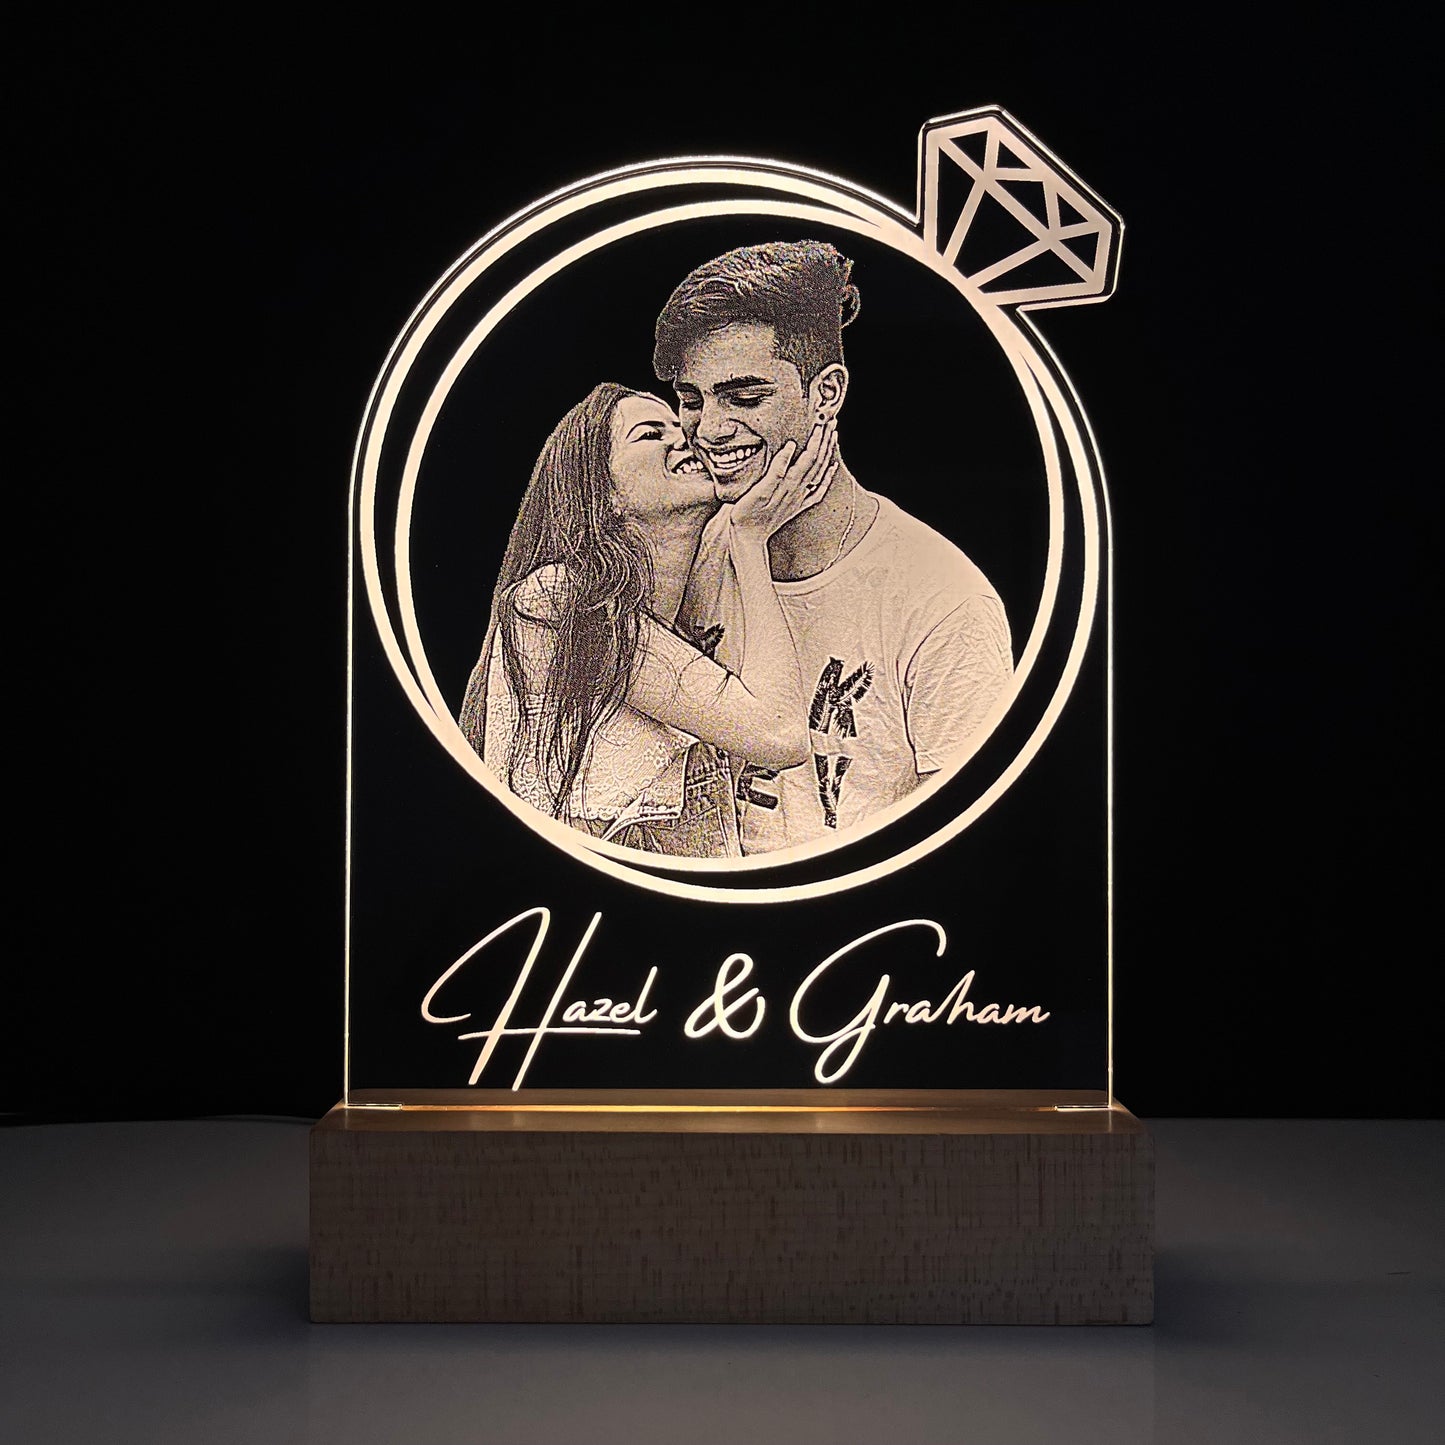 Customized Photo Lamp with Name Ring Design